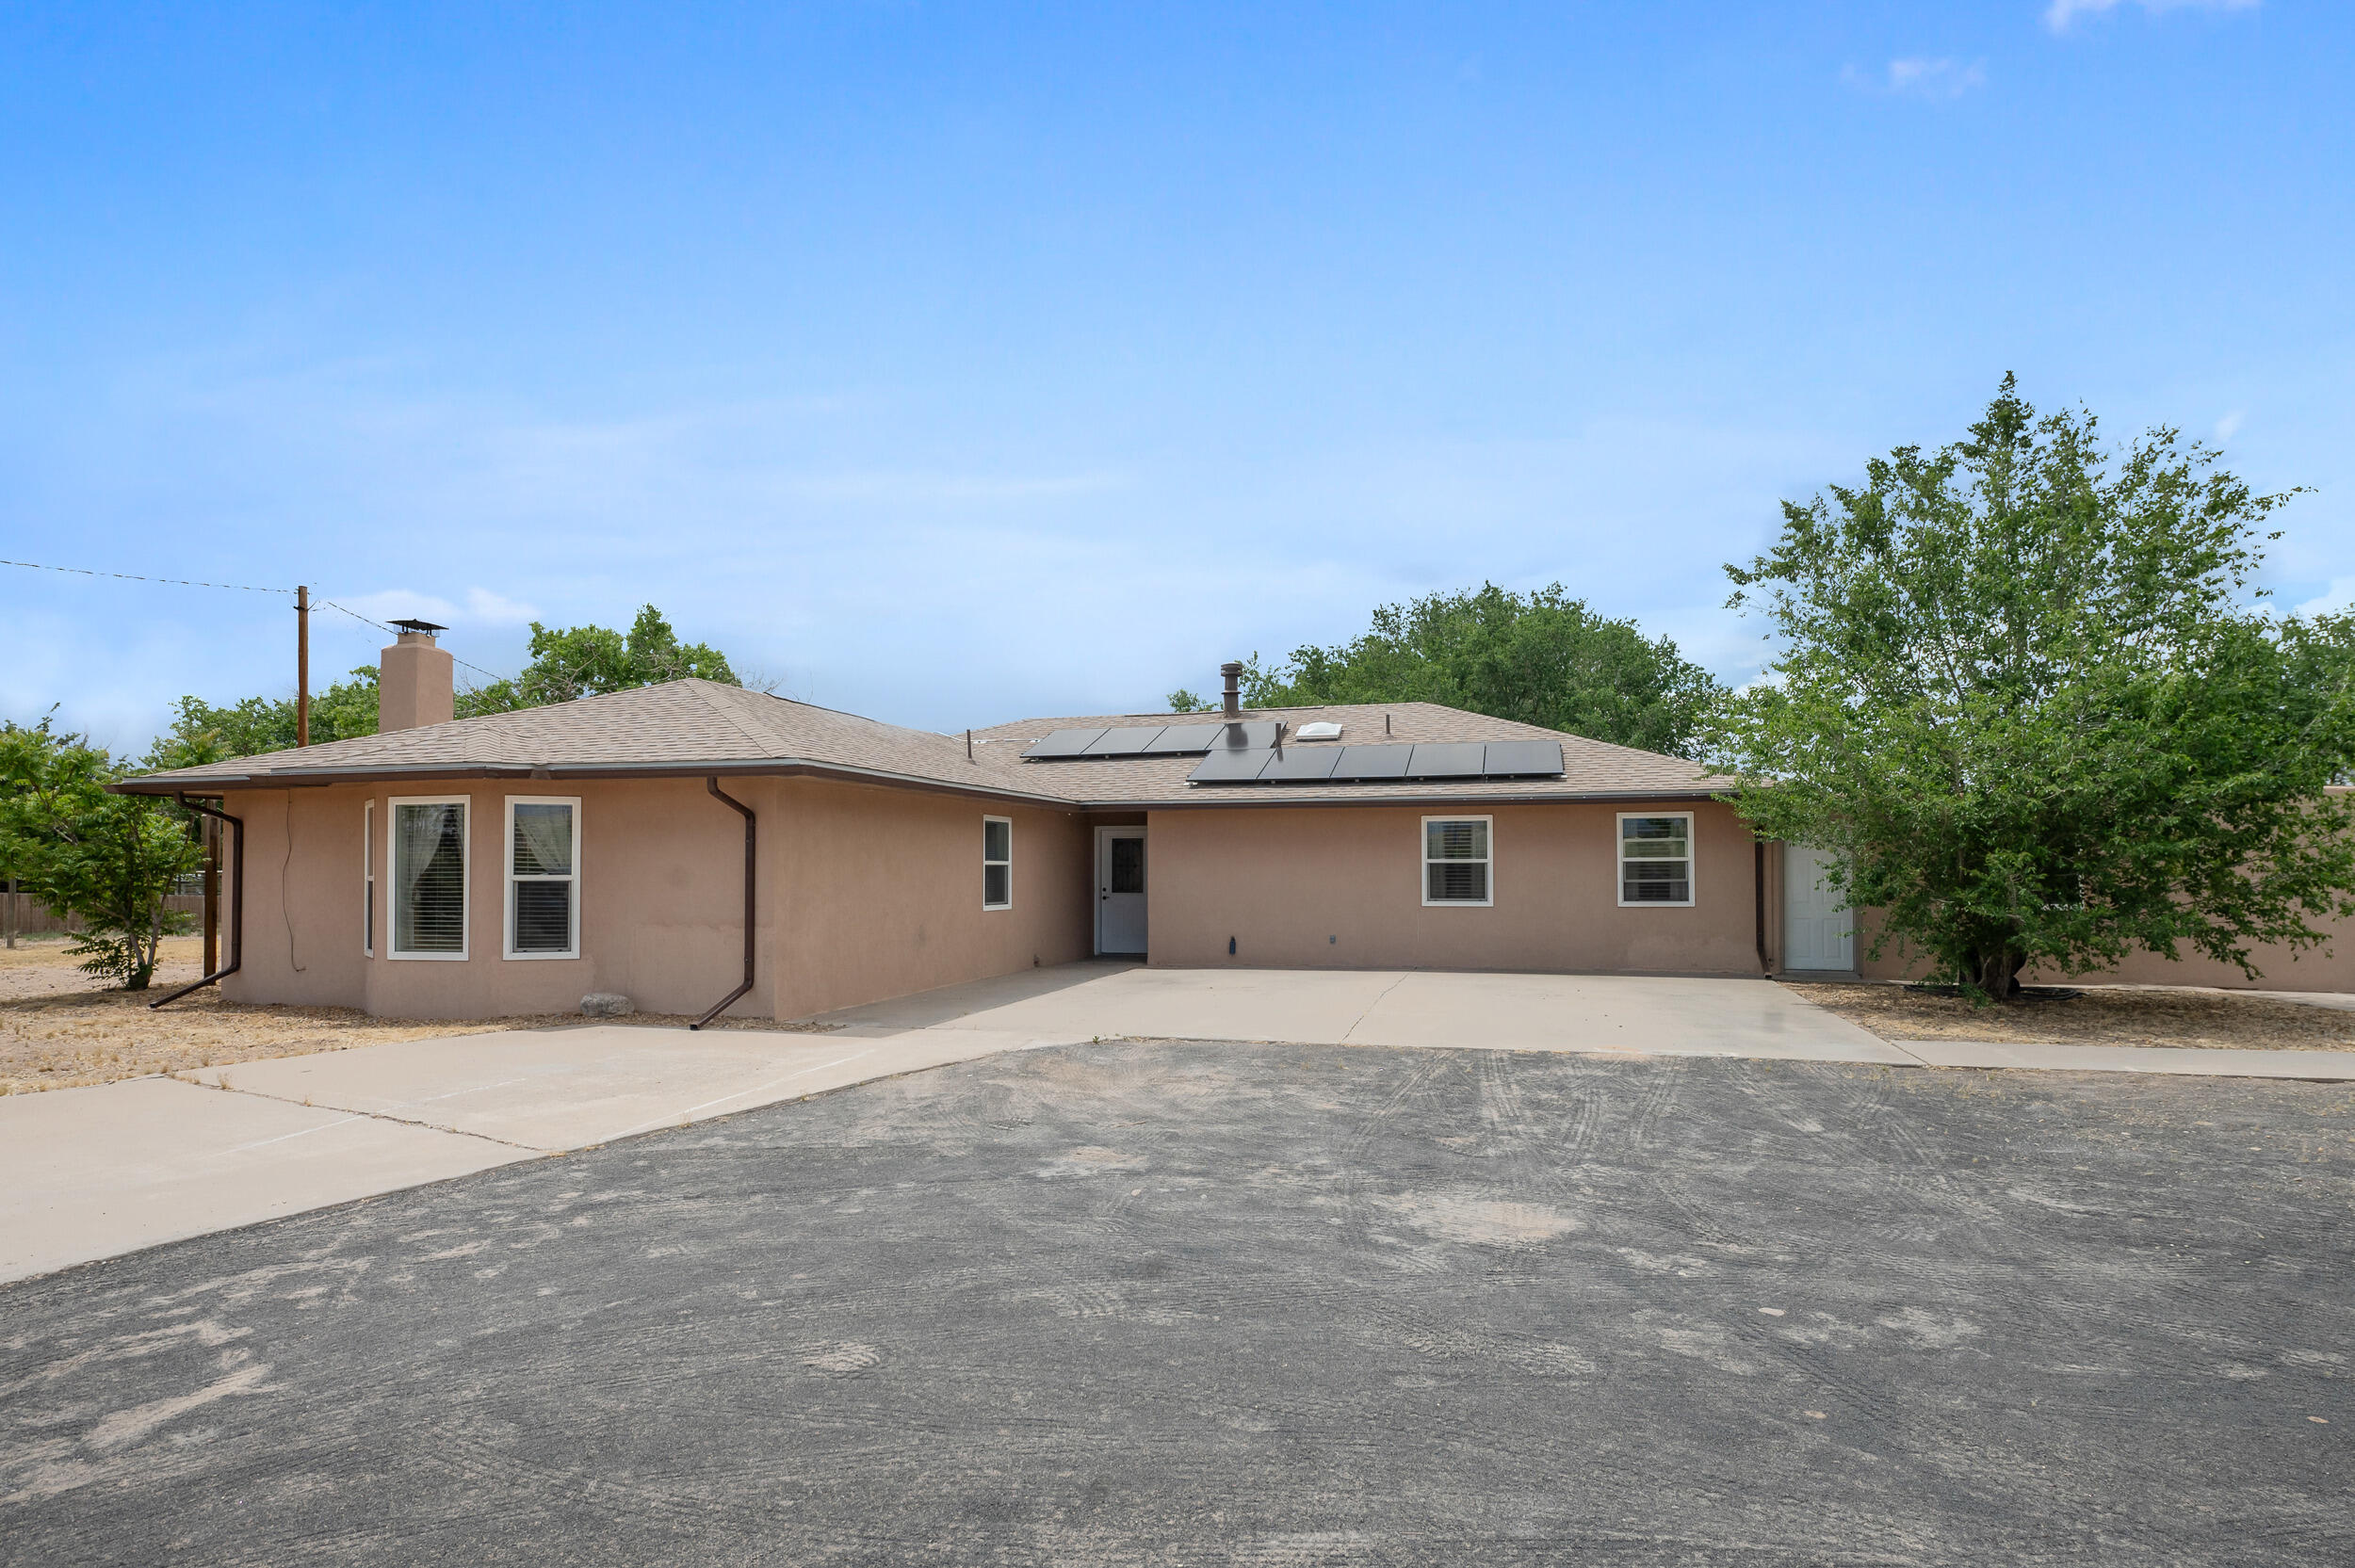 Spectacular home located just south of the UNM Valencia campus and away from the hustle and bustle of the city.  You'll enjoy seeing the pride of ownership radiating throughout this home.  The home showcases a large kitchen with updated cabinets and a kitchen bar that overlooks the living room.  Additionally, the large family room offers extra living space with a wood burning fireplace.  Both areas provide excellent space to entertain family and friends.  Enjoy your morning coffee in the sun room or outdoor deck with a covered canopy.  Furthermore, you'll enjoy the refrigerated air for those hot summer days.  Lastly, the lot is big enough to give you the extra space you need but not too big to maintain.  So don't delay, schedule your showing today!